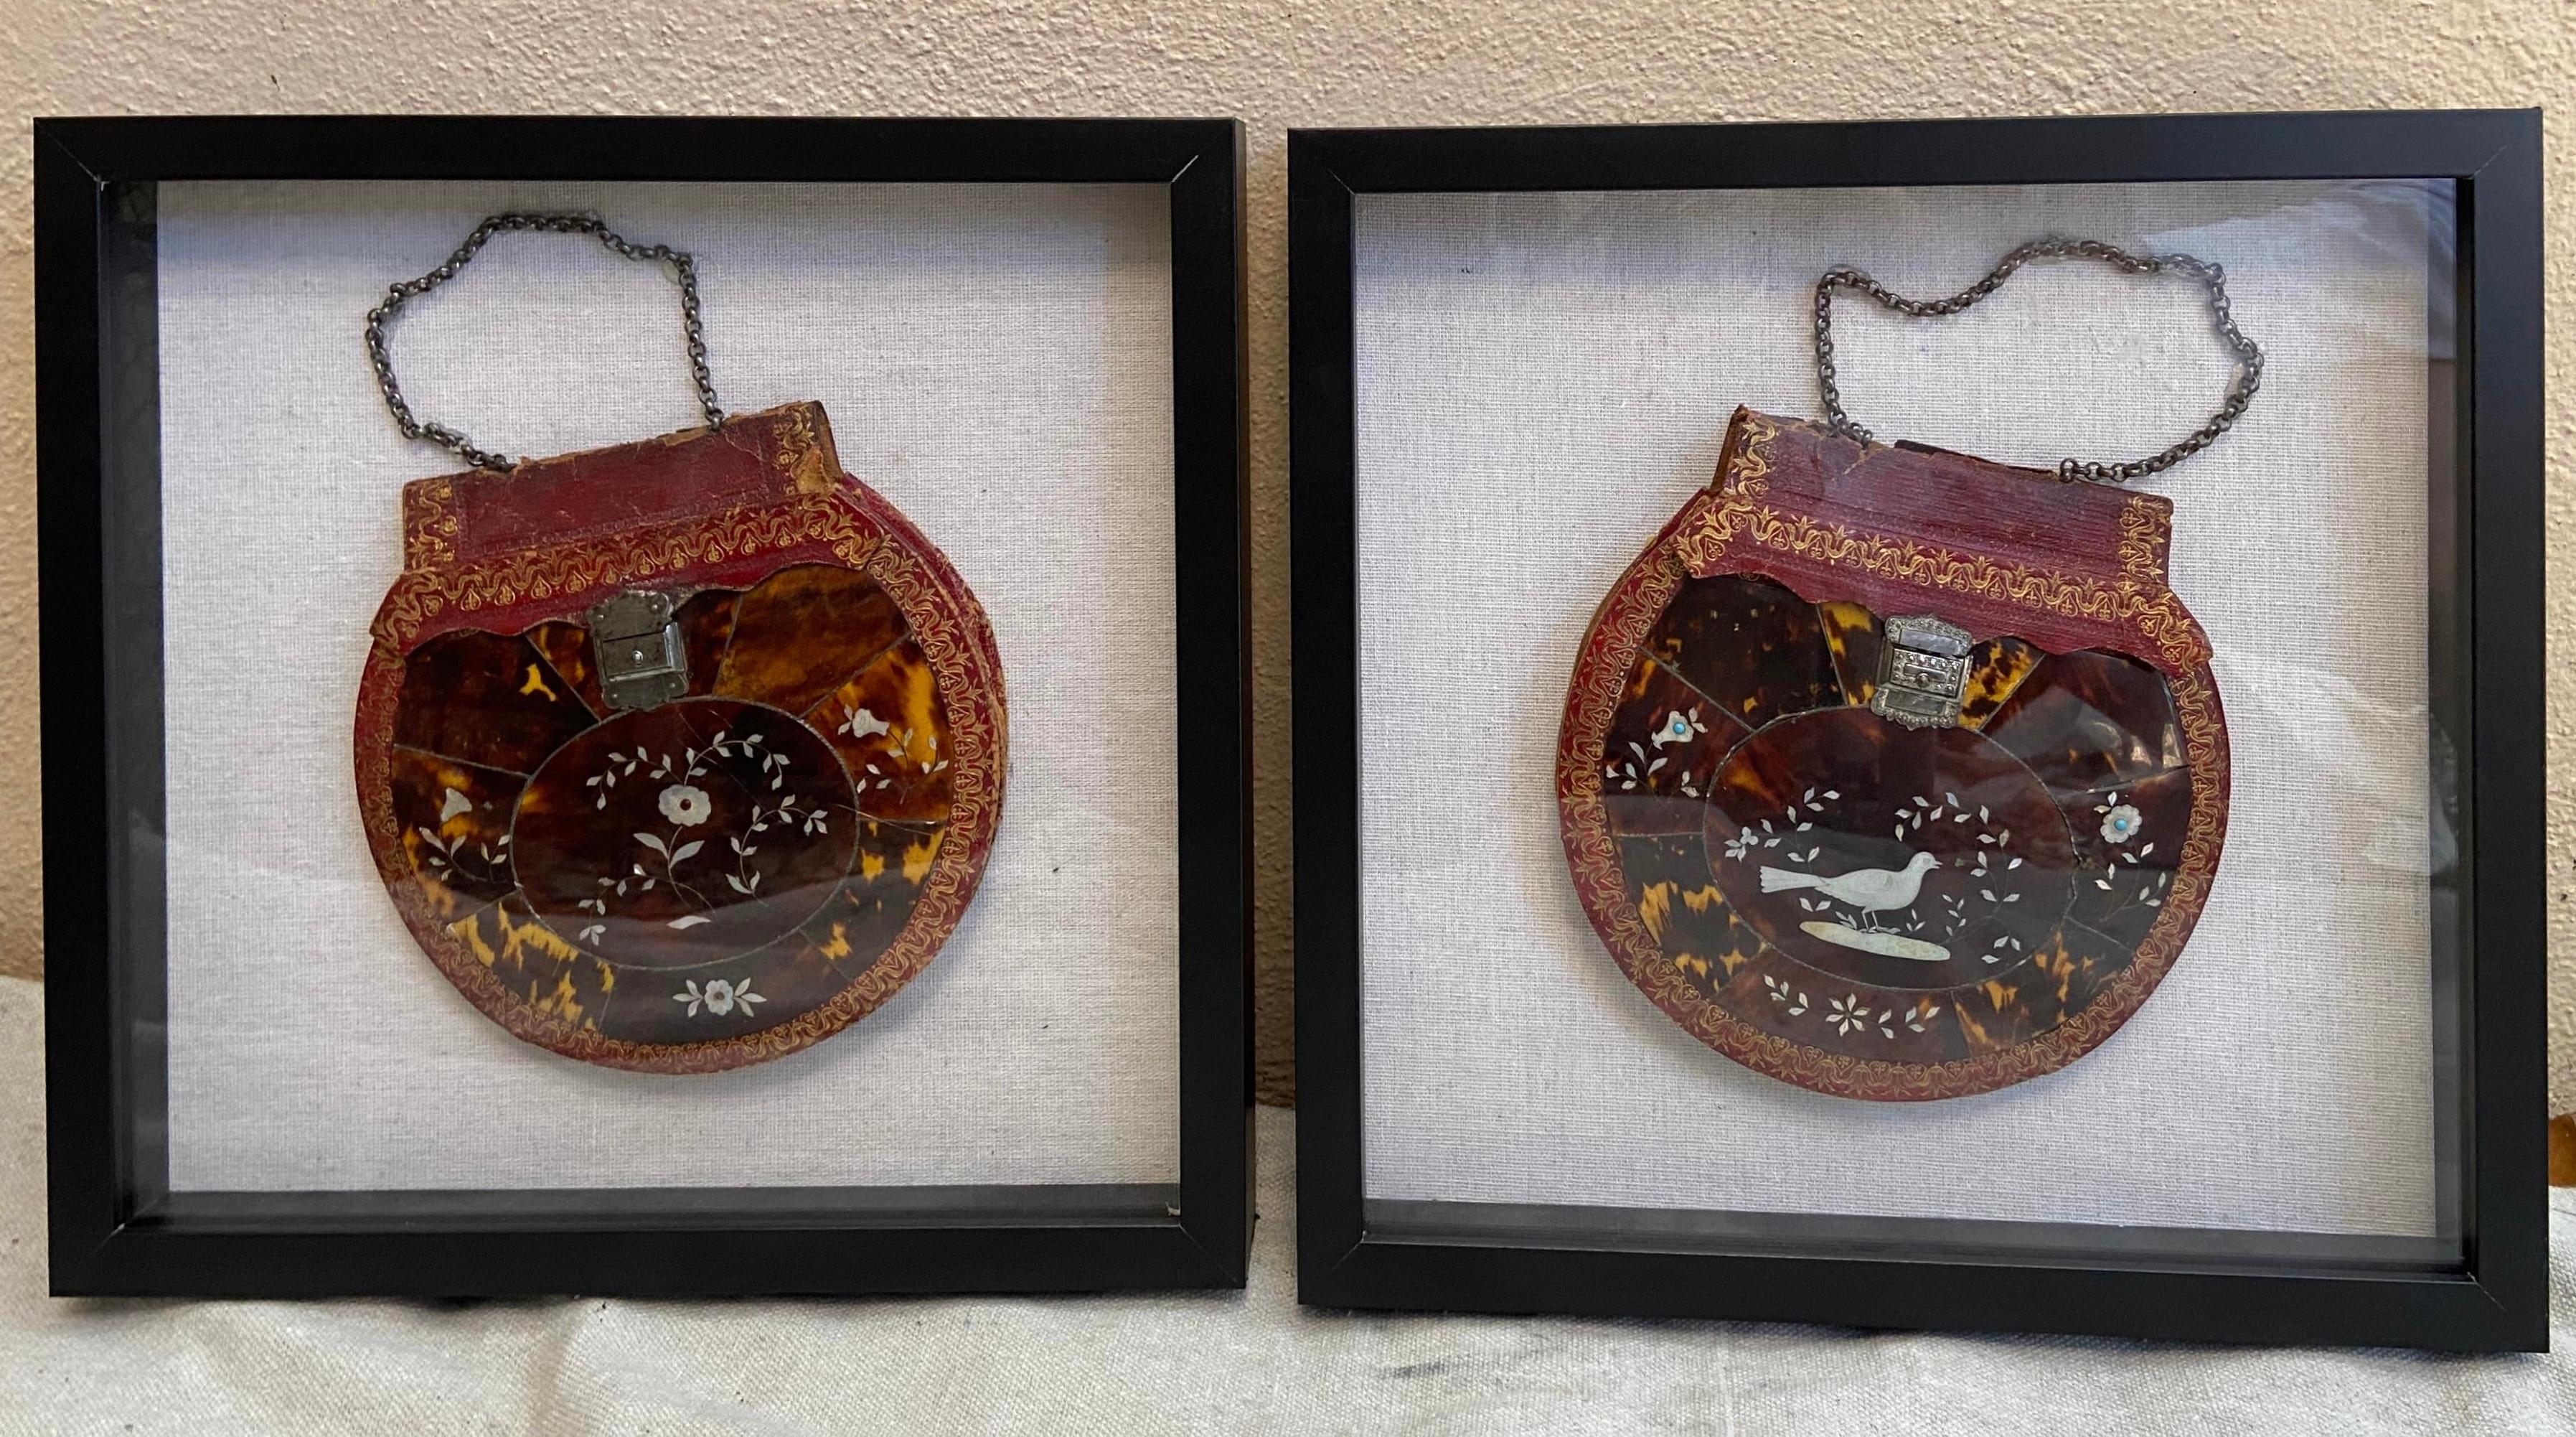 Beautiful set of two Mid-Century Modern shell purses. Both have mother of pearl, turquoise and silver inlay and are now mounted in new shadowboxes. Very unique decorative wall art.